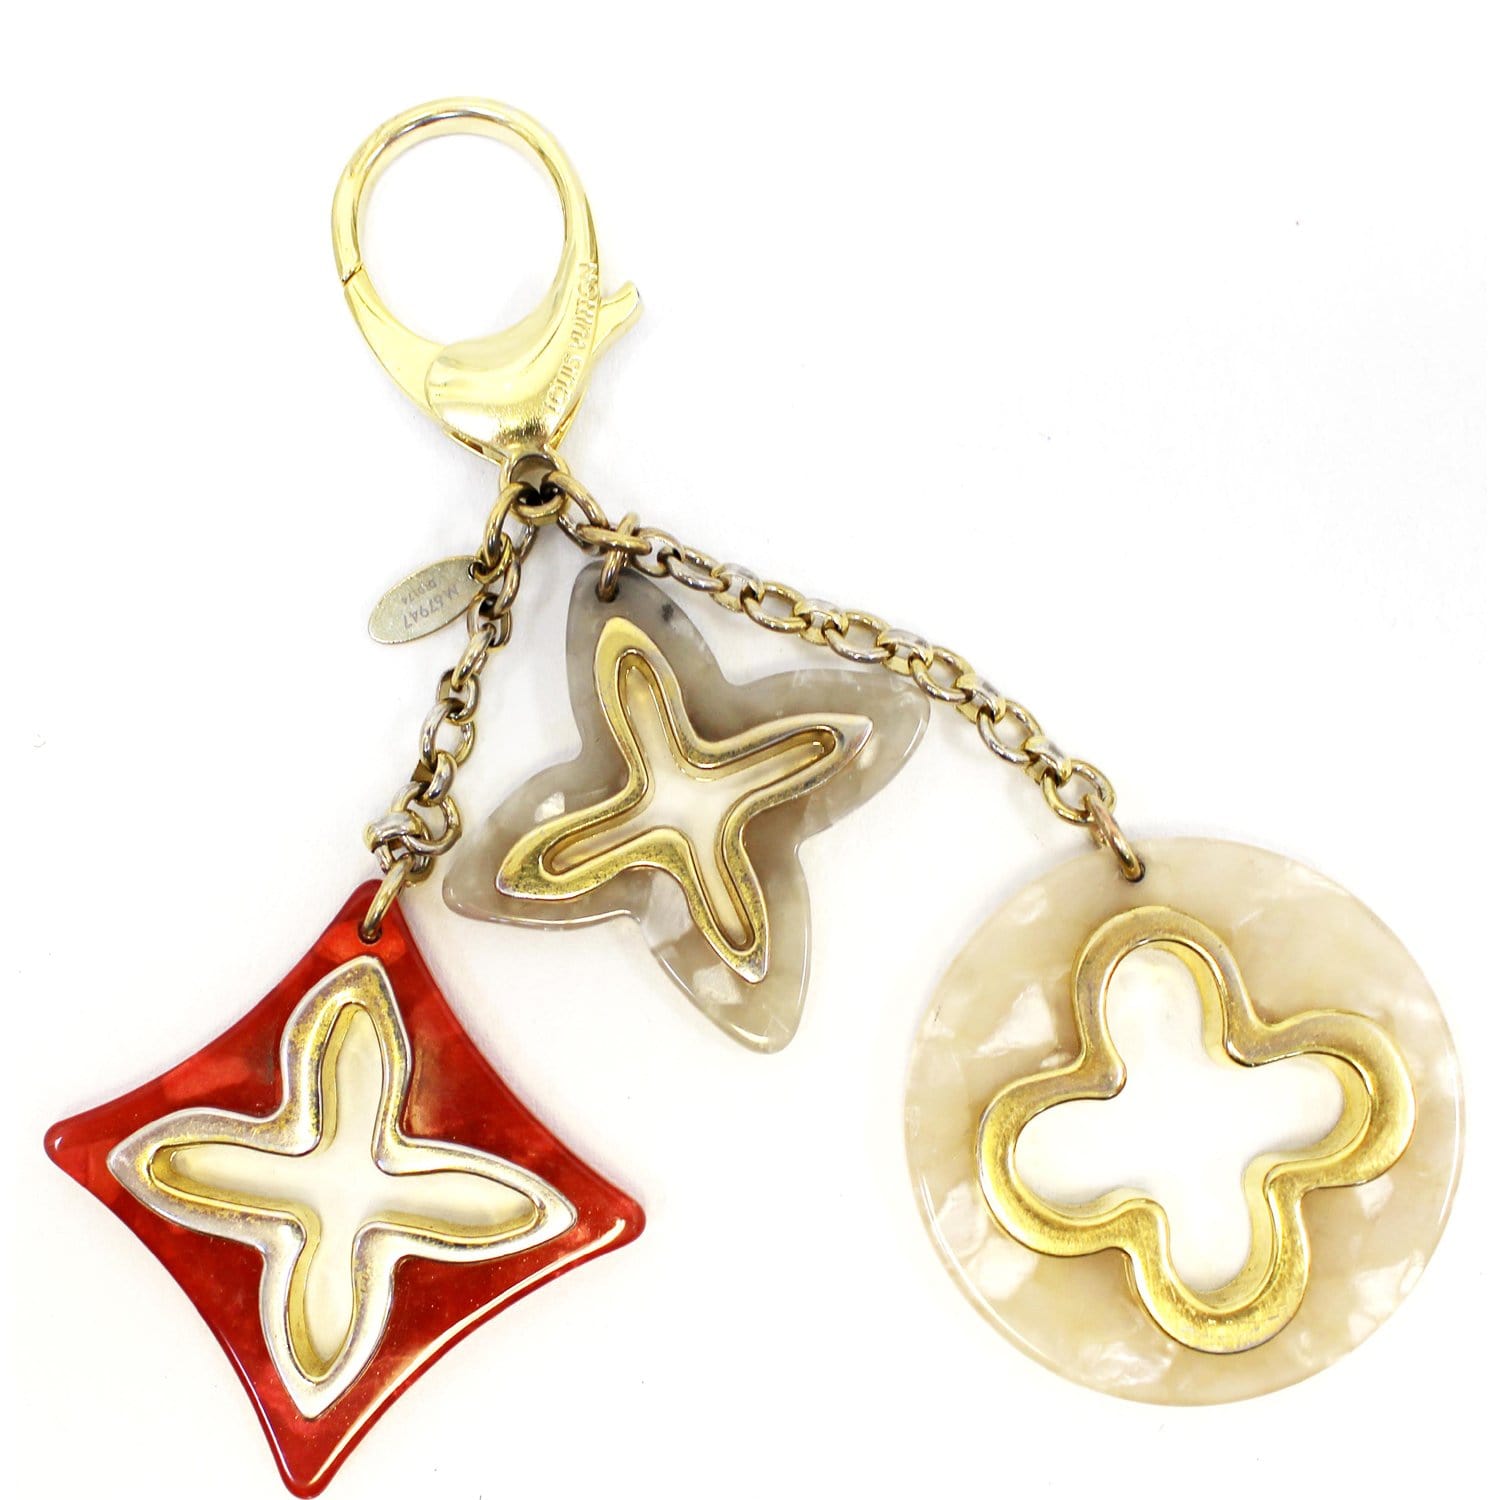 LOUIS VUITTON Insolence Key Holder and Bag Charm-US